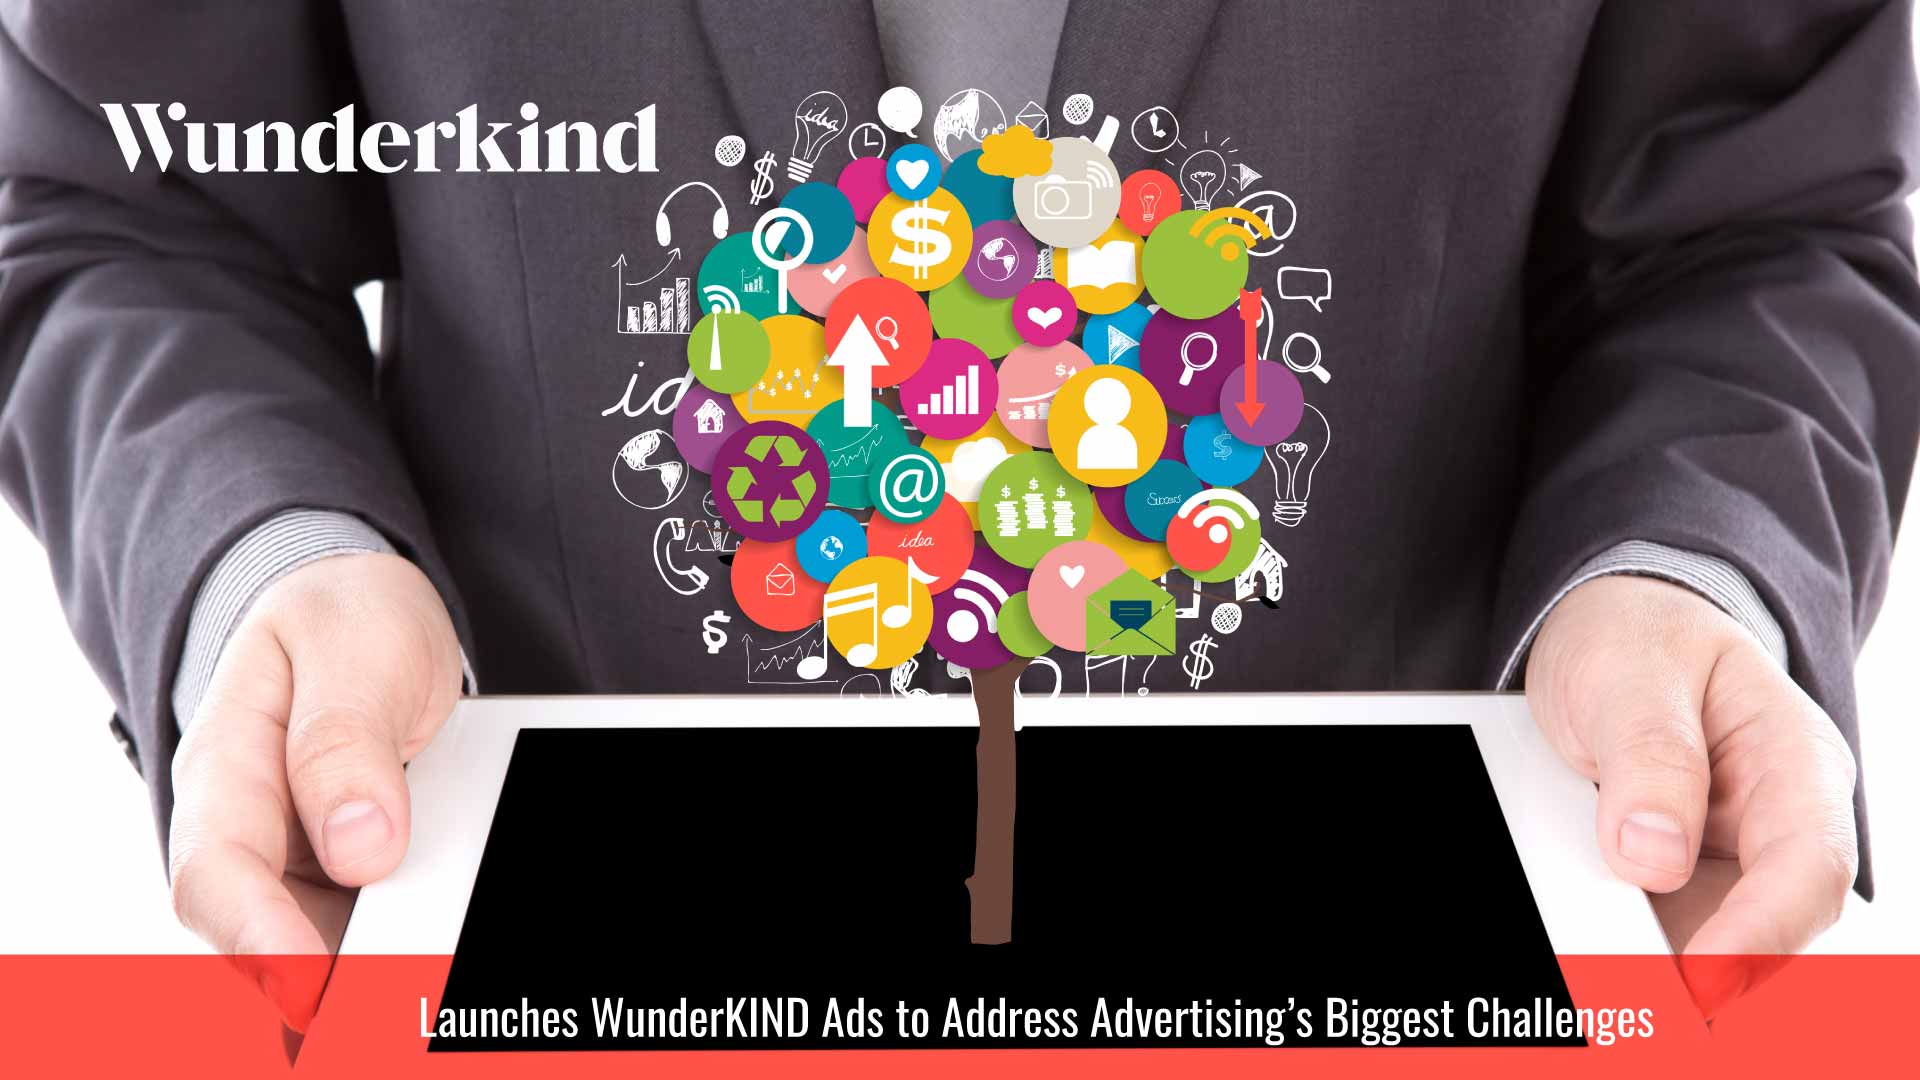 Wunderkind Launches WunderKIND Ads To Address Advertising’s Biggest Challenges